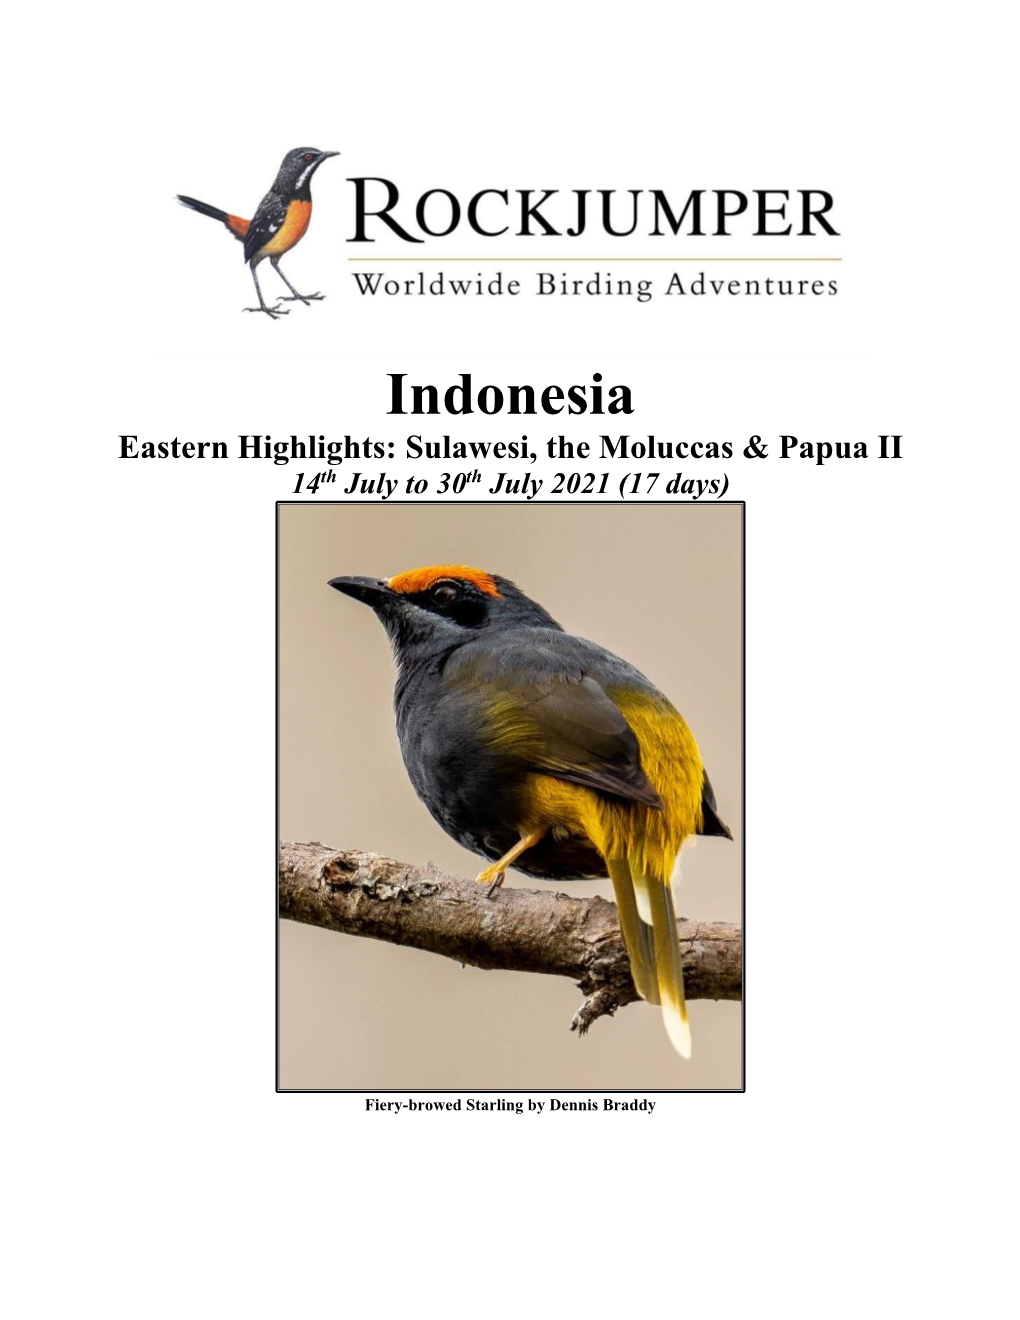 Indonesia Eastern Highlights: Sulawesi, the Moluccas & Papua II 14Th July to 30Th July 2021 (17 Days)